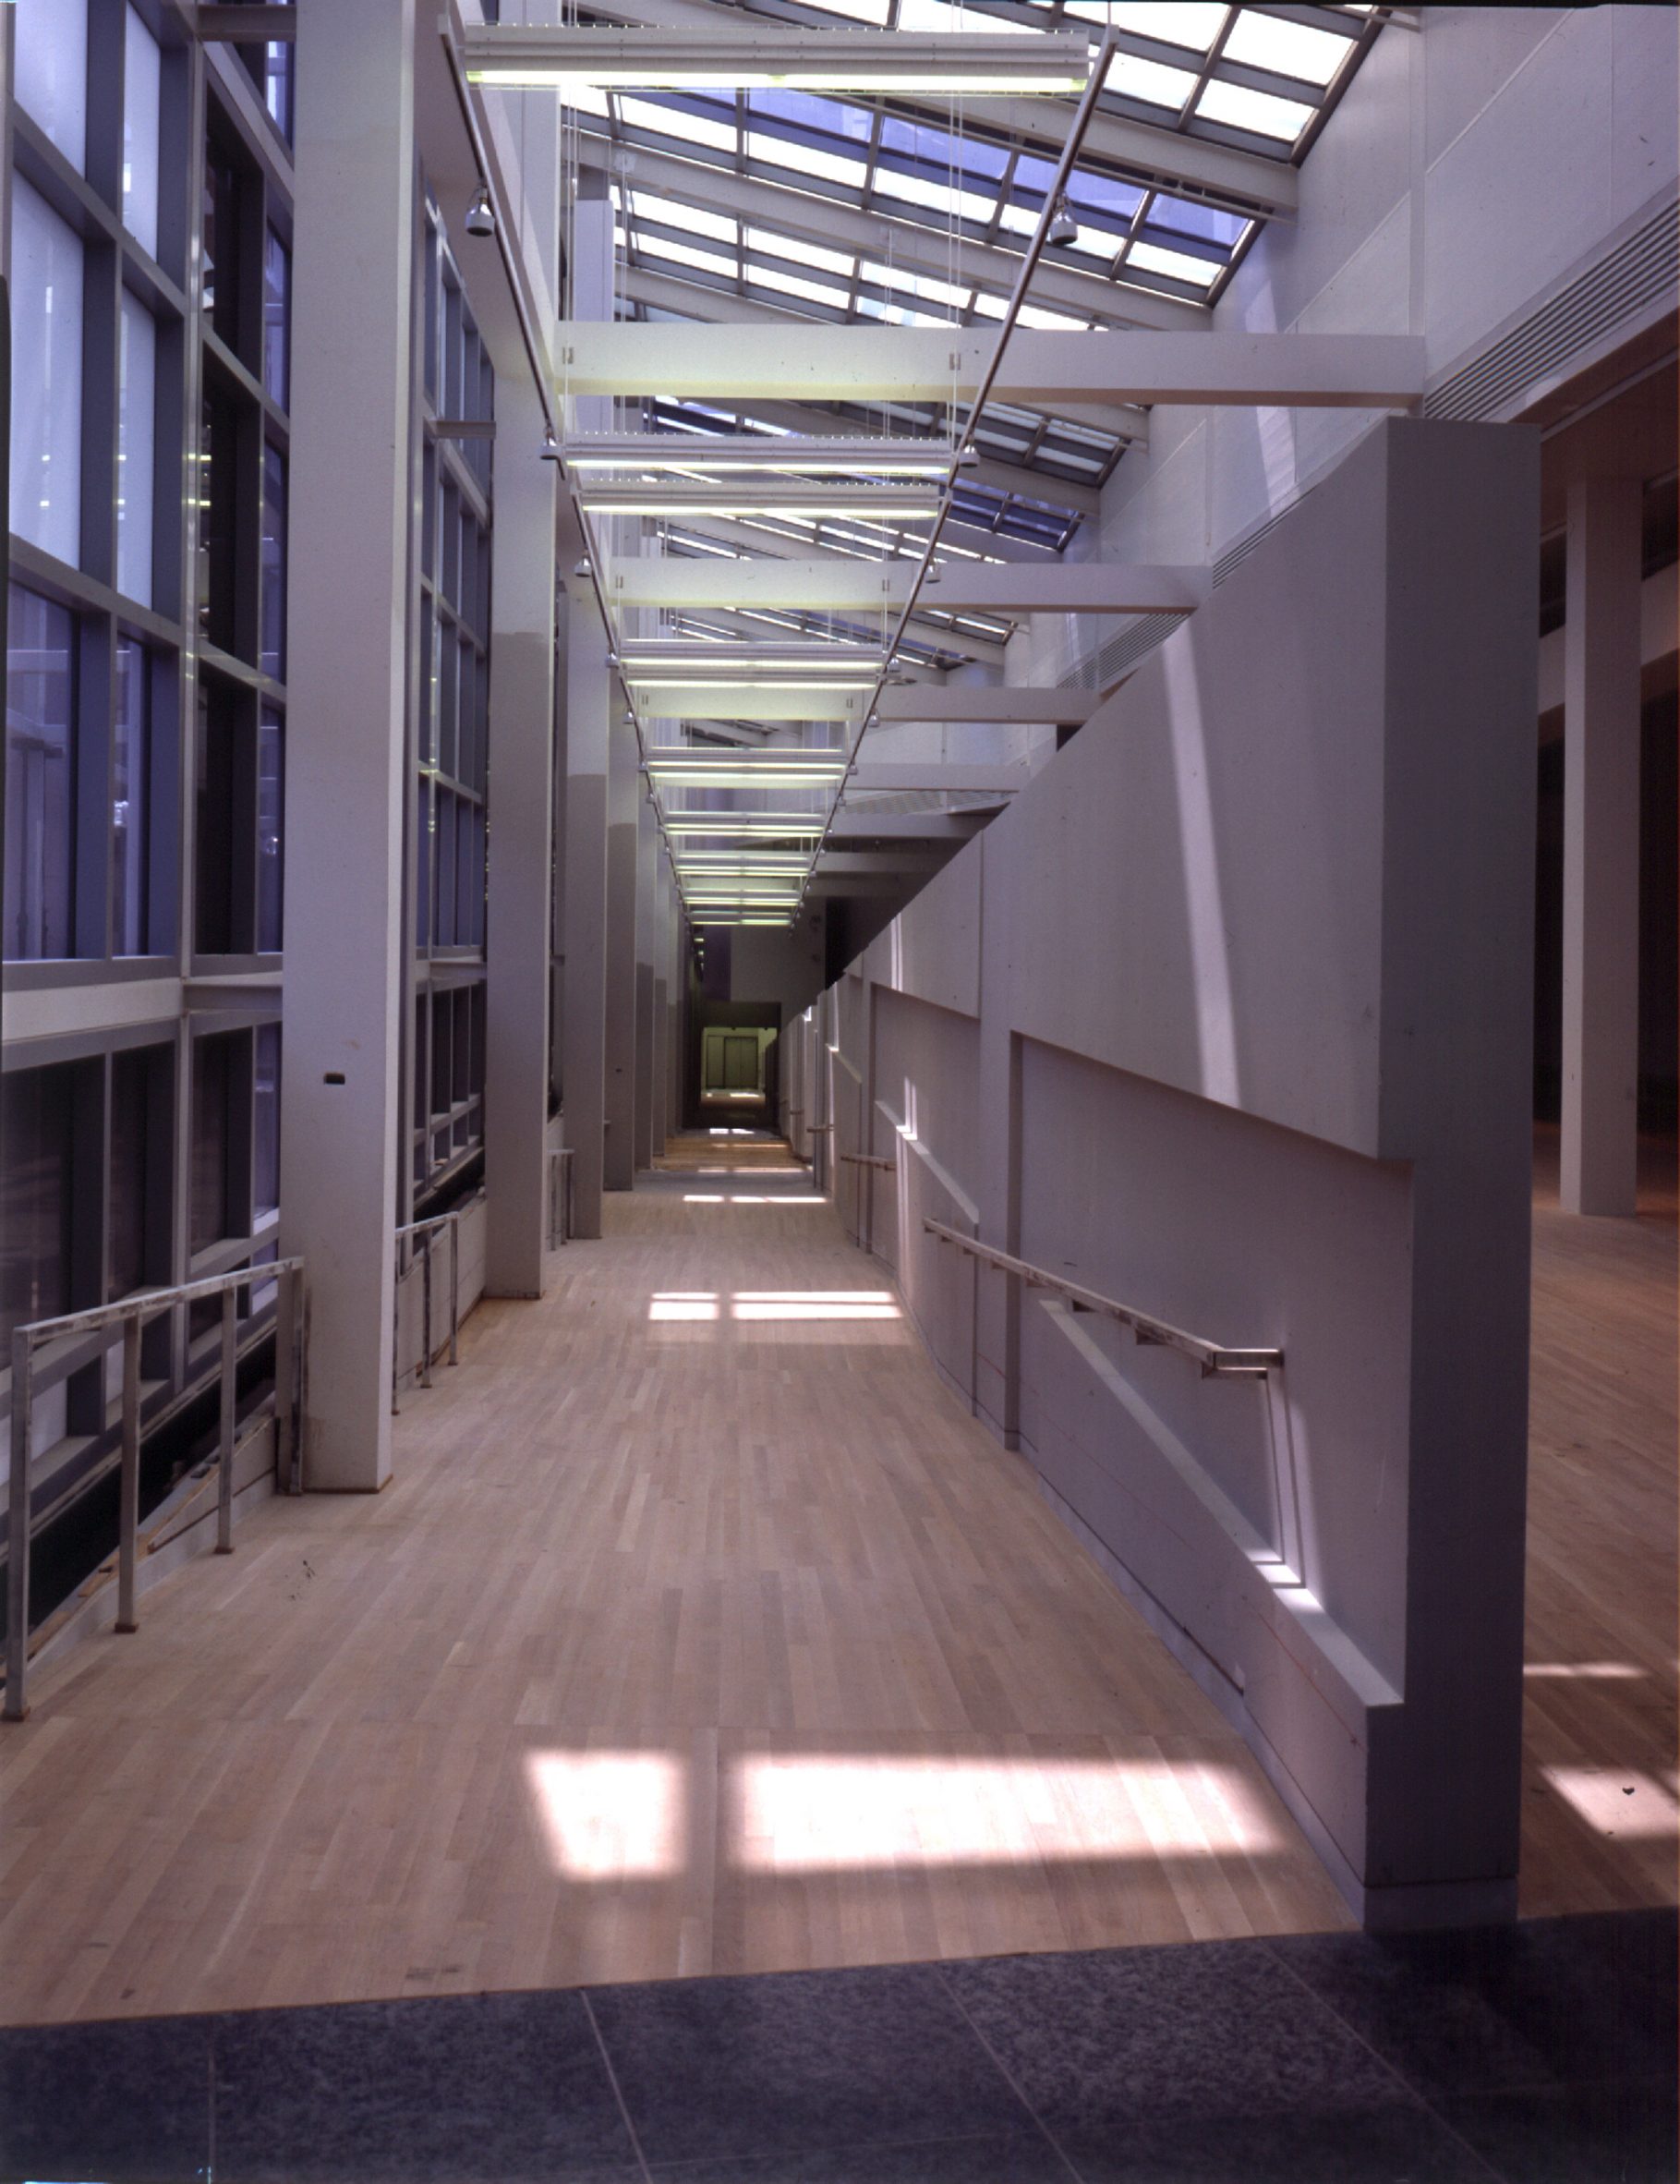 Interior image of the Wexner Center for the Arts